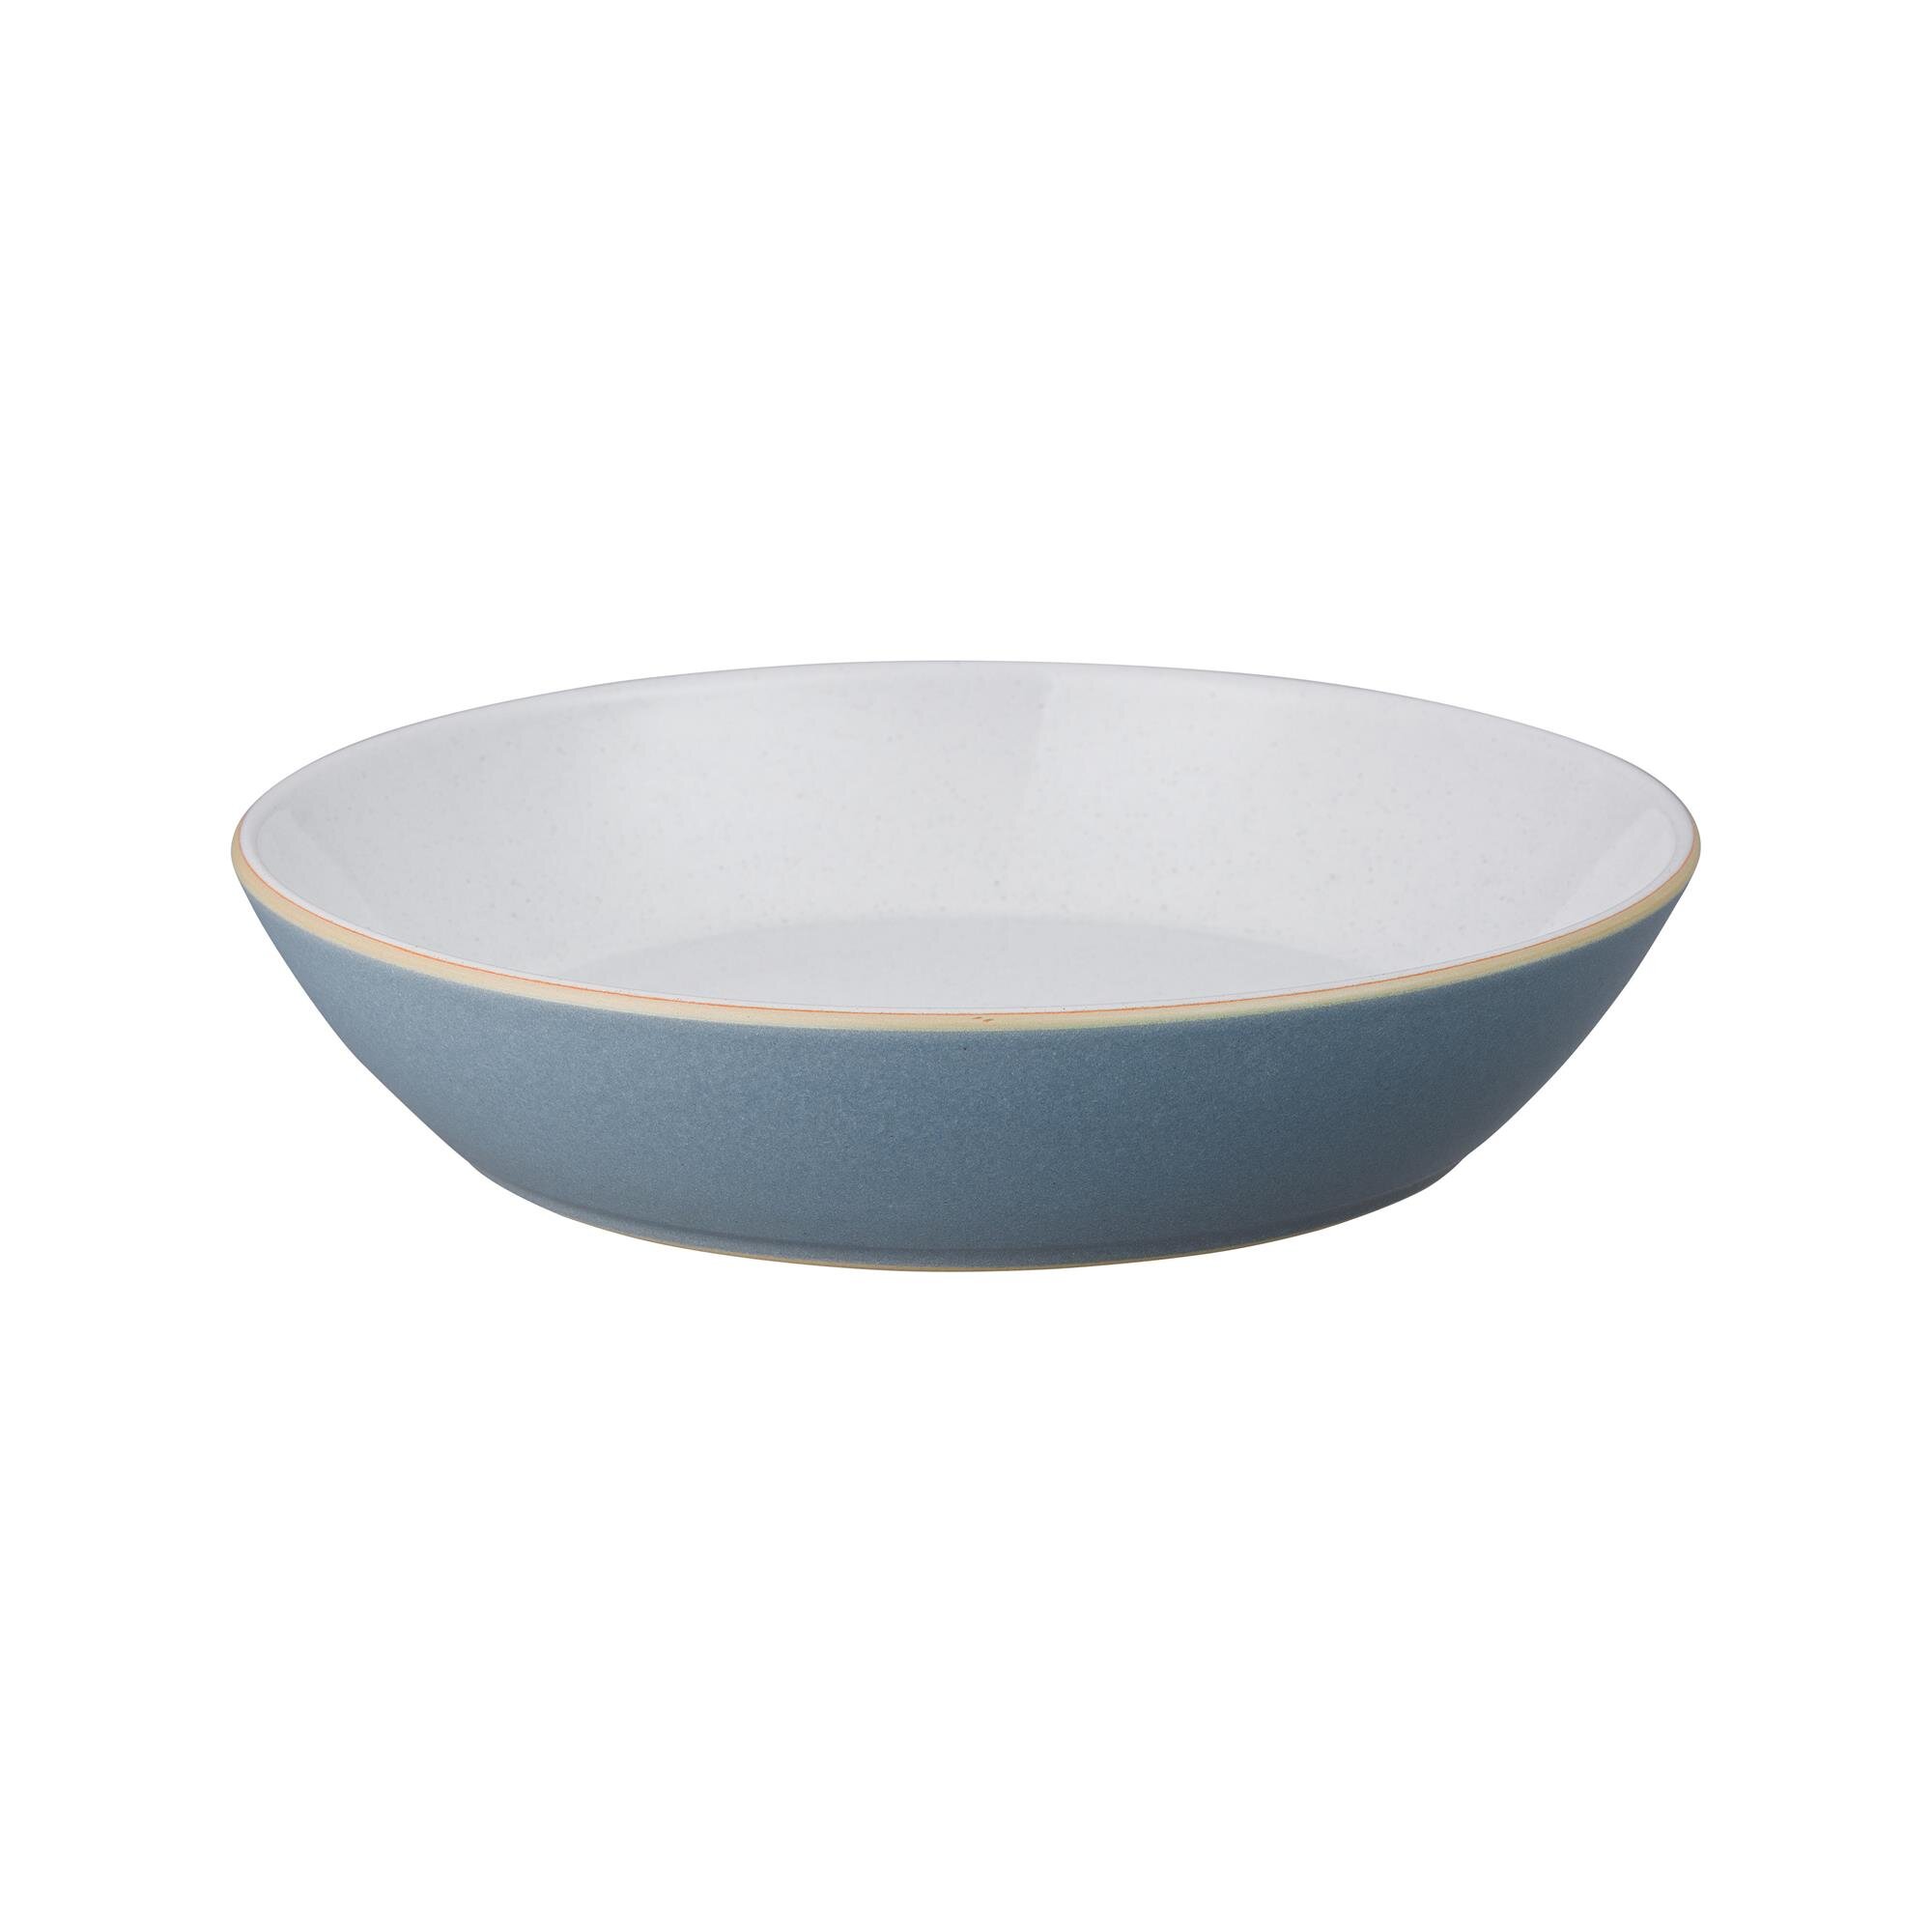 Buy Denby Set of 4 Impression Mixed Straight Bowls from the Next